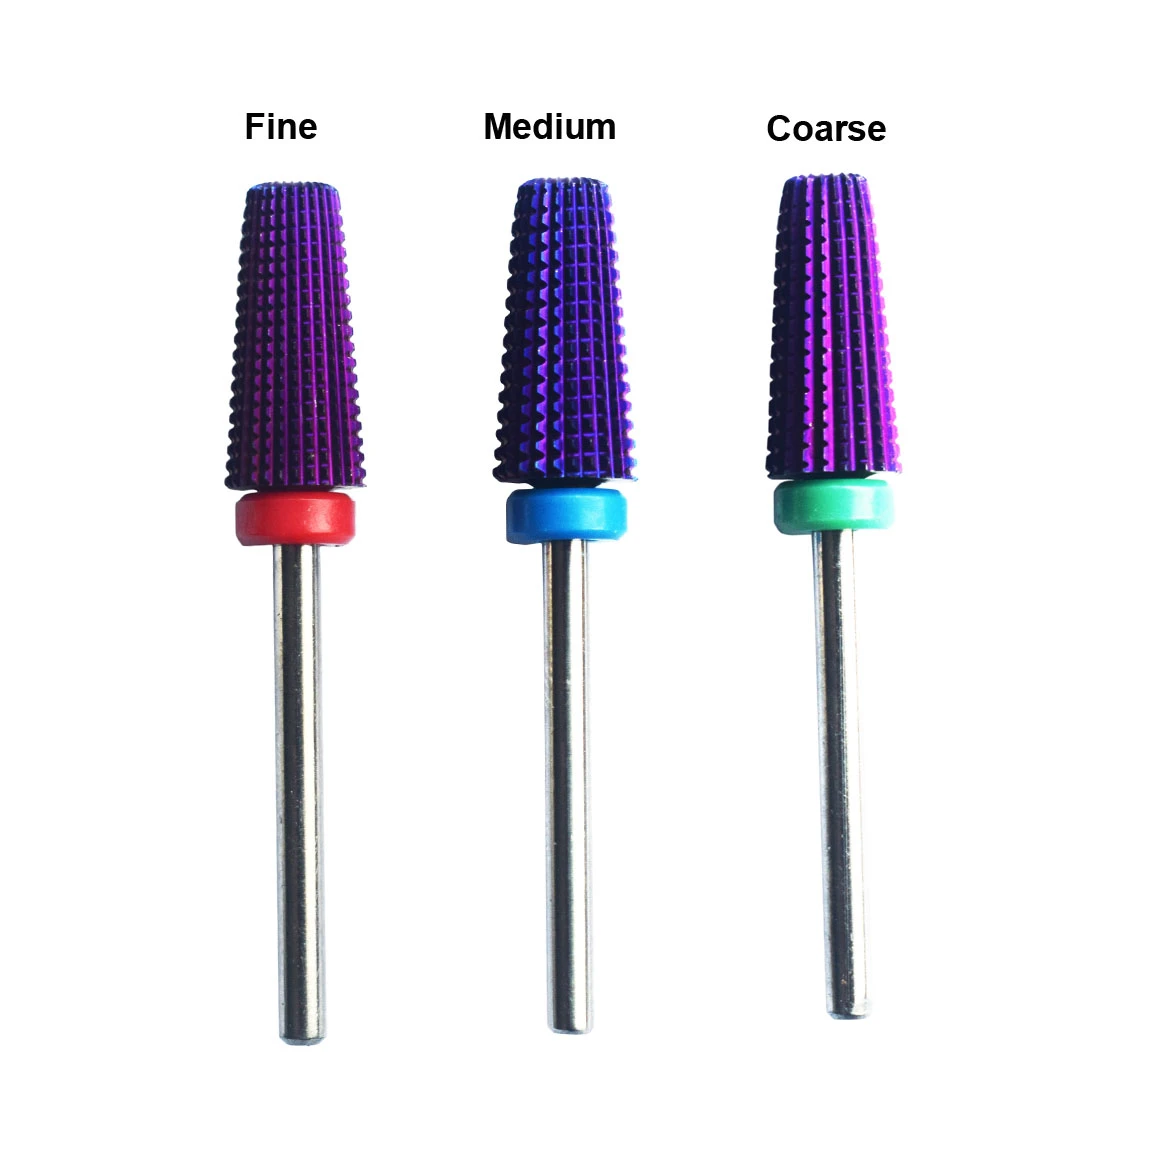 Purple Tungsten Carbide Nail Drill Bit 5 In 1 Tapered Drills Milling for Manicure Remove Gel Acylics Nails Accessories Tools